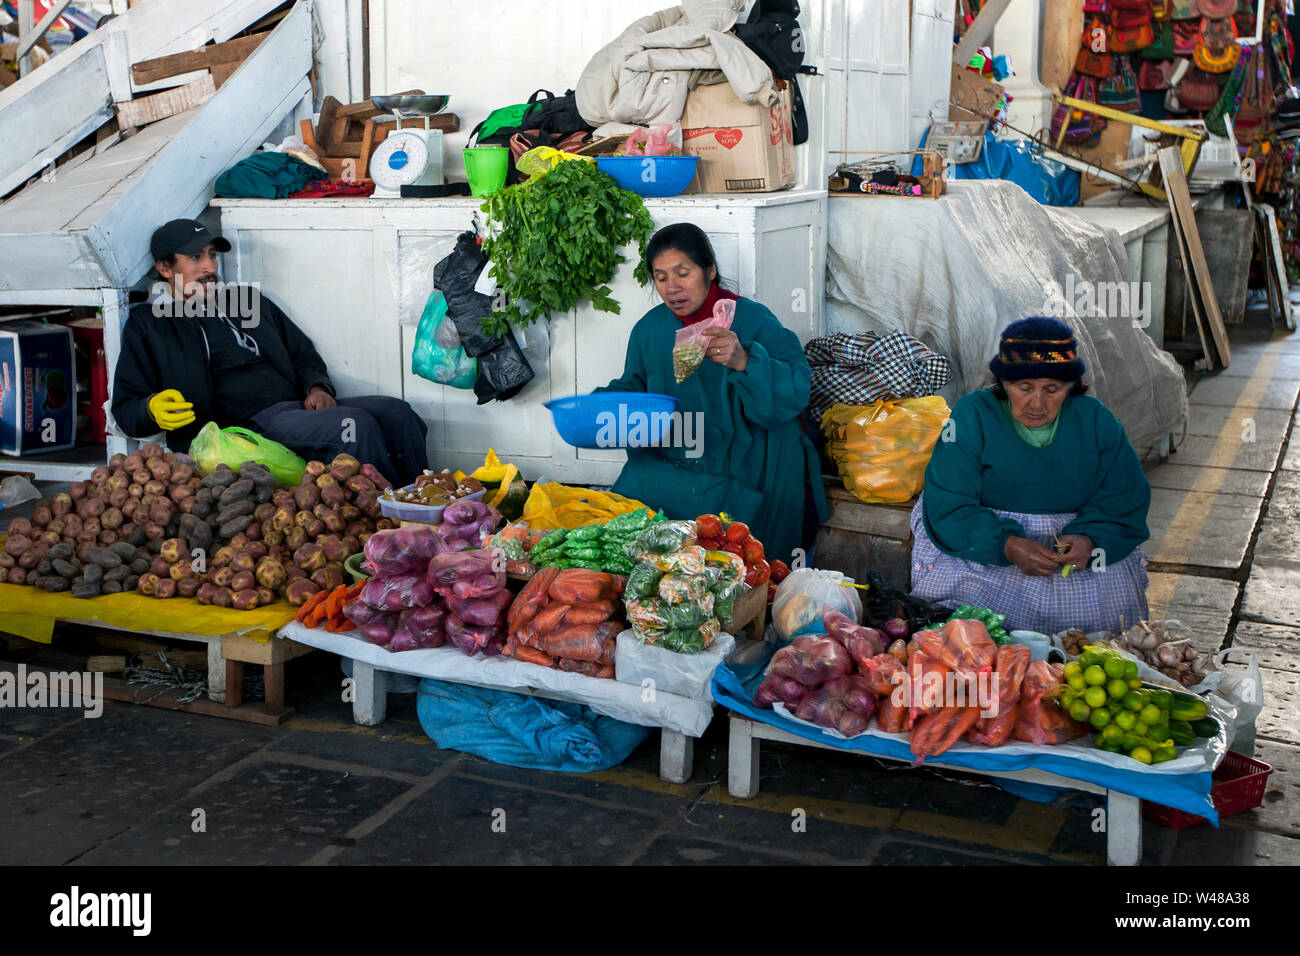 A family selling a variety of fresh fruit and vegetables sit at their stall inside the undercover market in central Cusco in Peru. Stock Photo